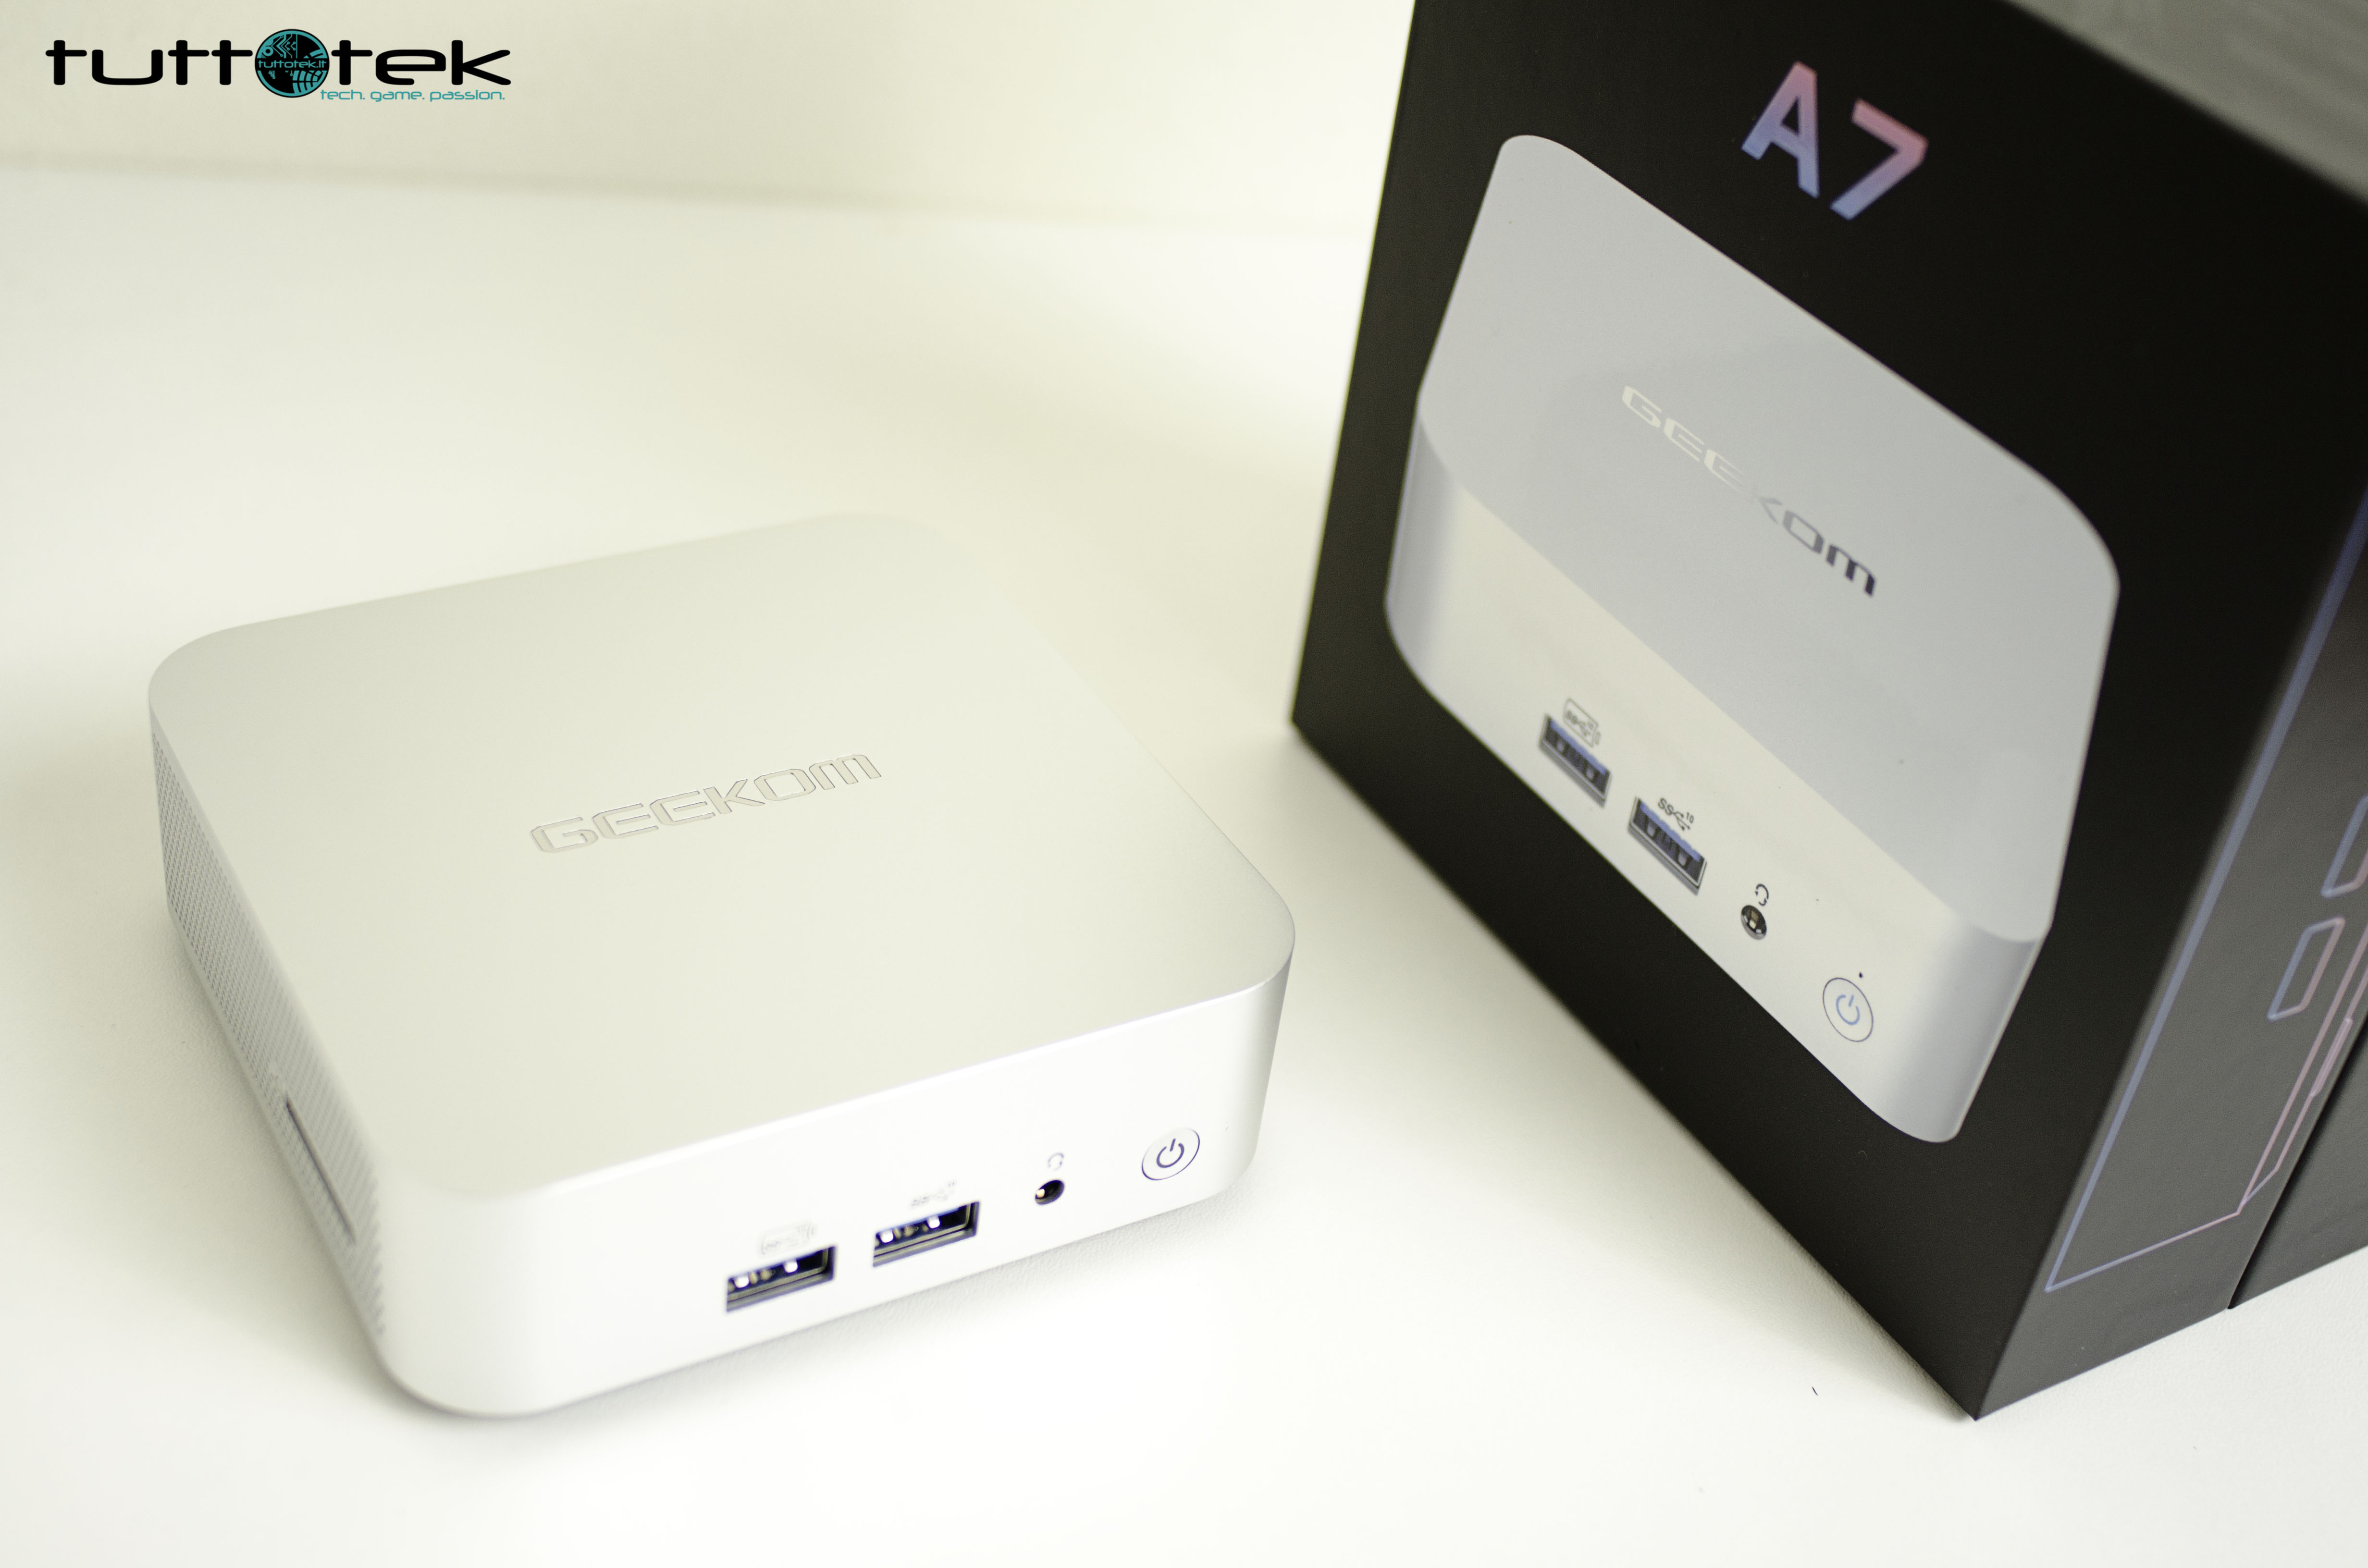 GEEKOM A7 review: mini Windows PC, compact and very powerful!